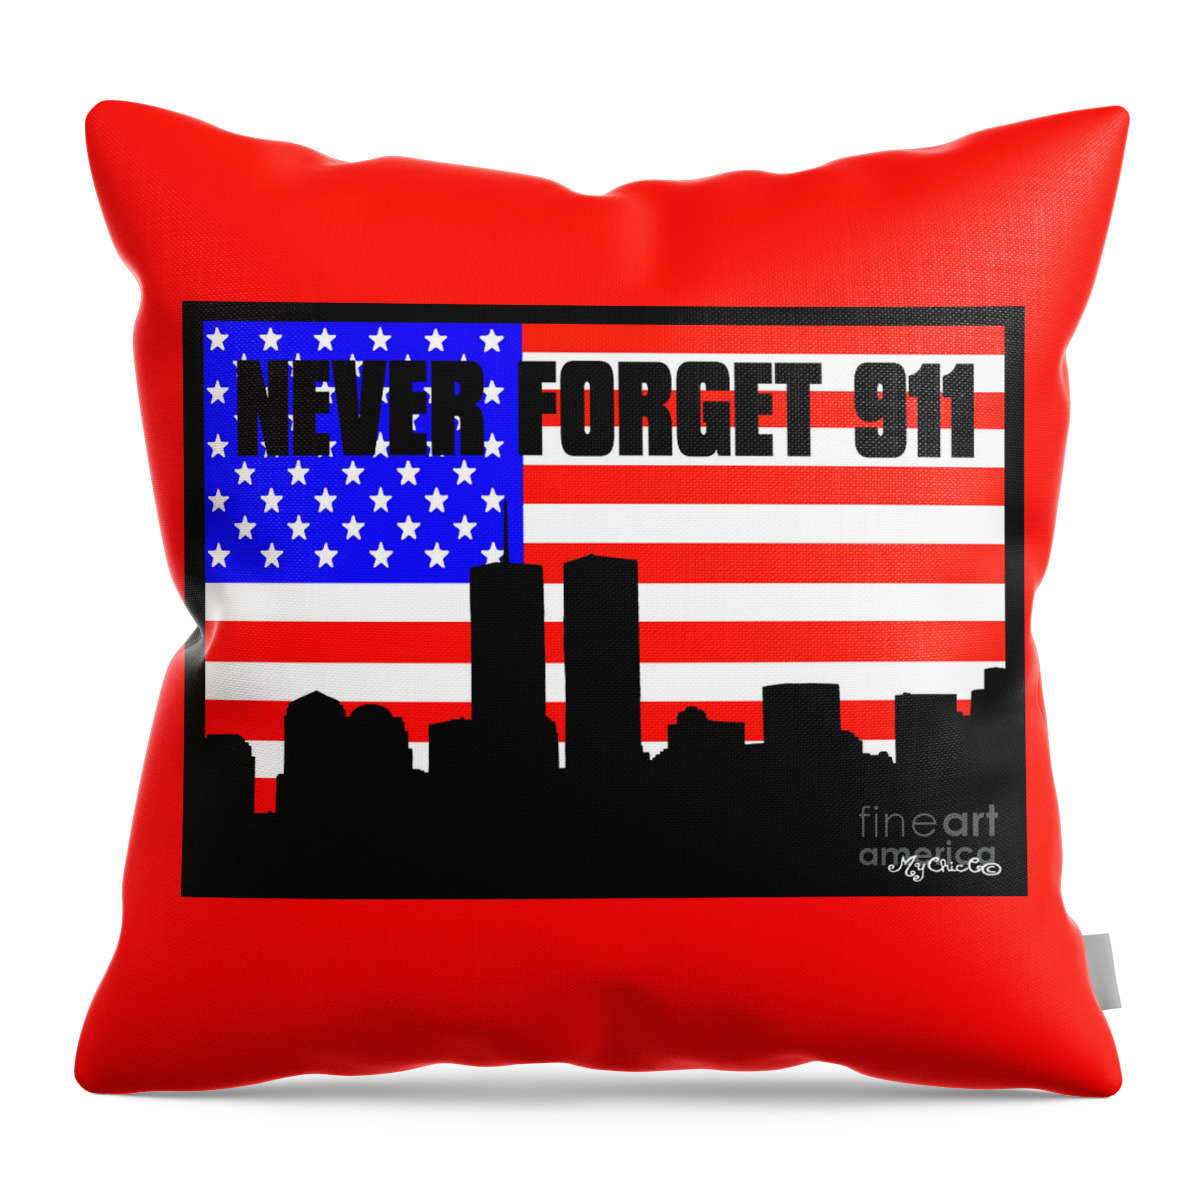 911 Throw Pillow featuring the digital art Never Forget 911 by Art by MyChicC